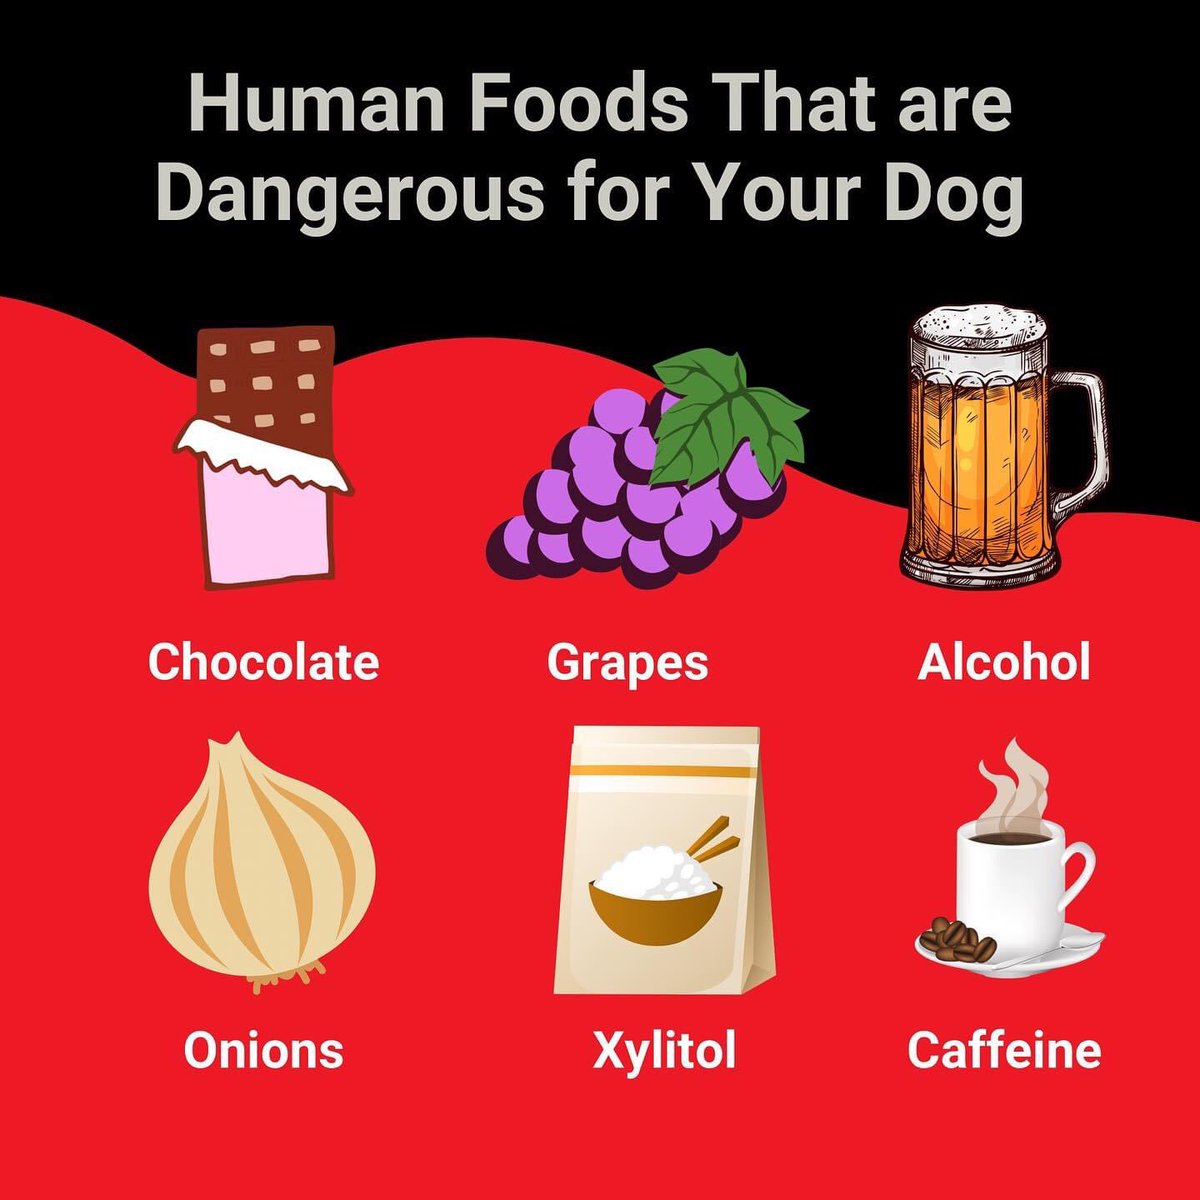 Human Foods that are toxic for your dog 🐶 ⚠️ #dogtips #dogfoods #primalpetgear #dogadvice #dogfeeding